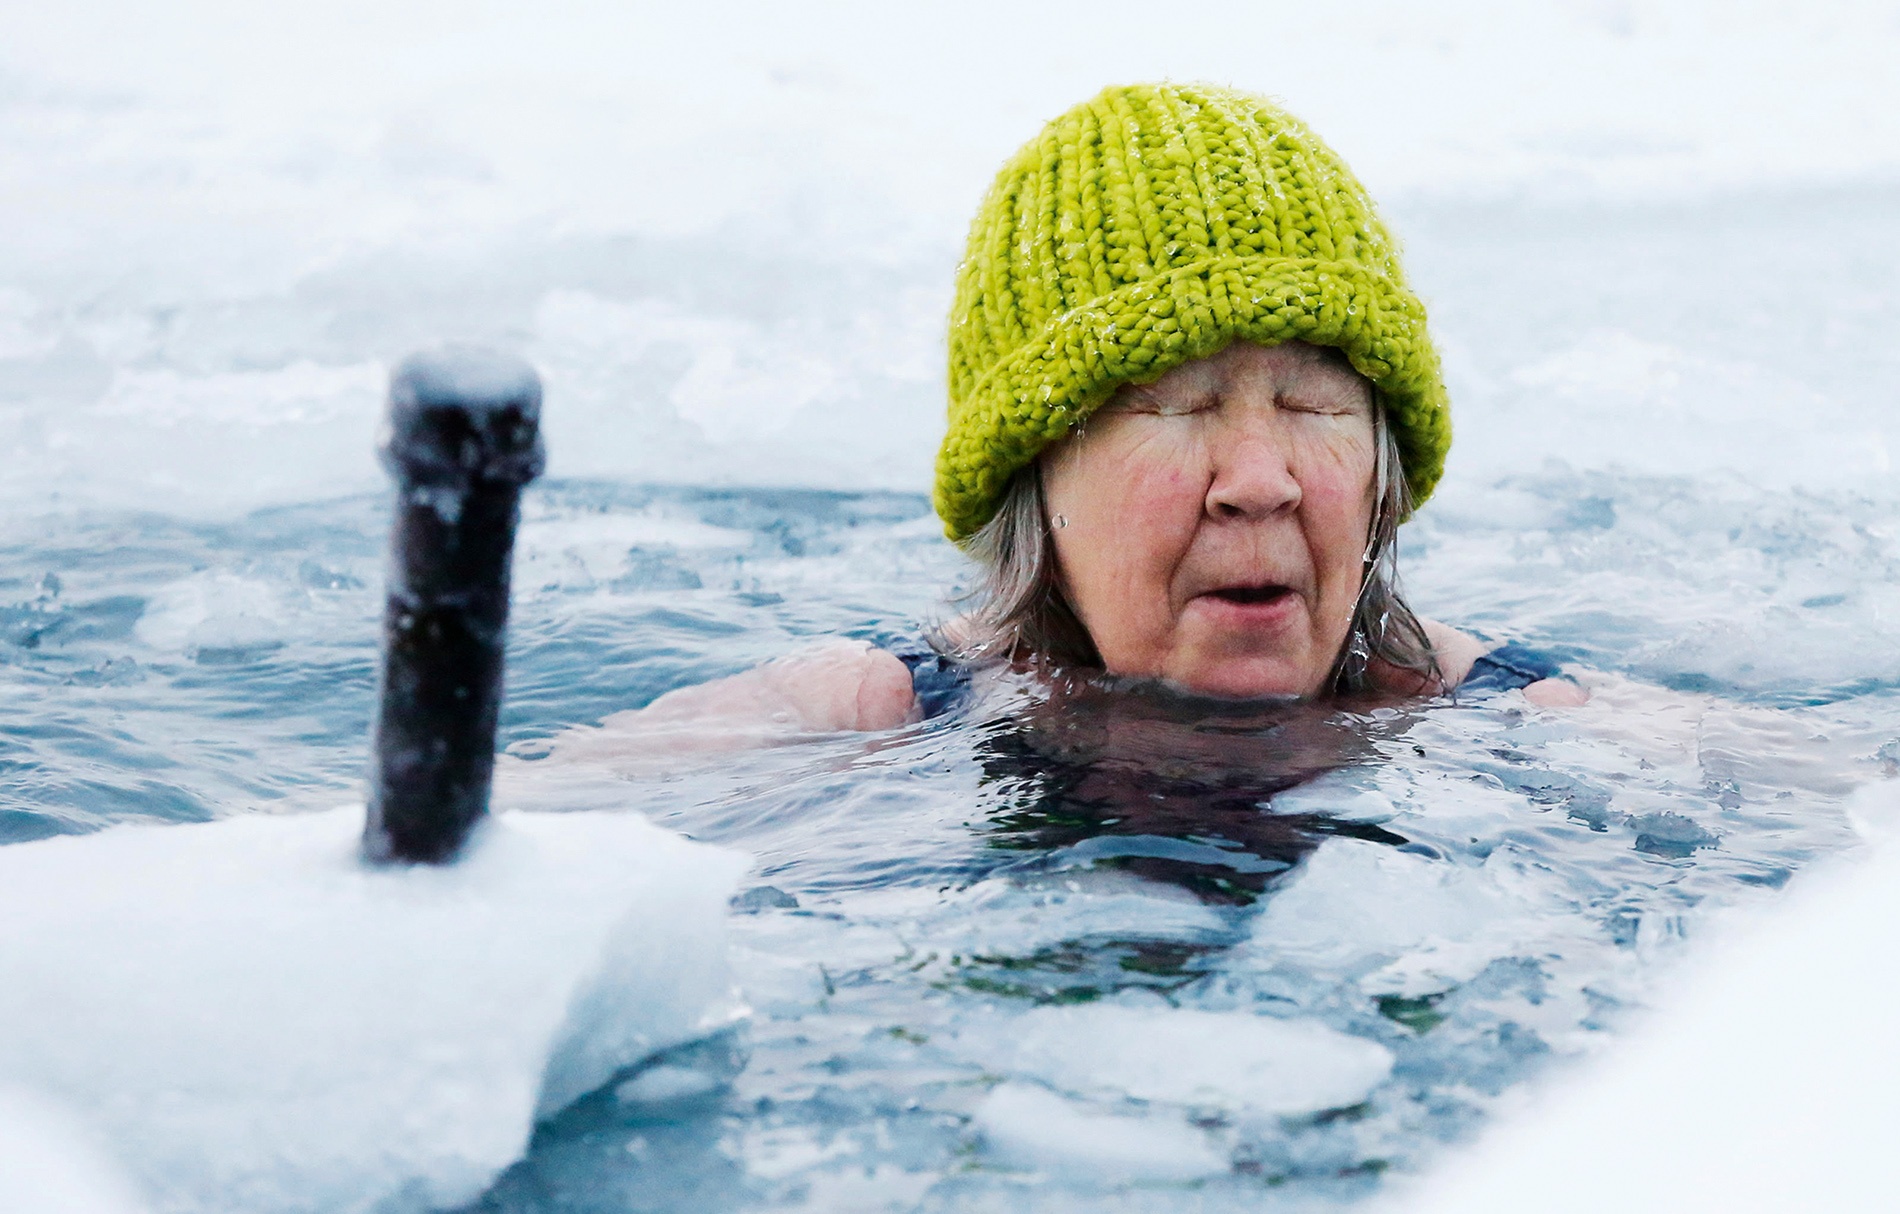 Image of Helen Wagner with eyes closed and a winter hat on in icy water.